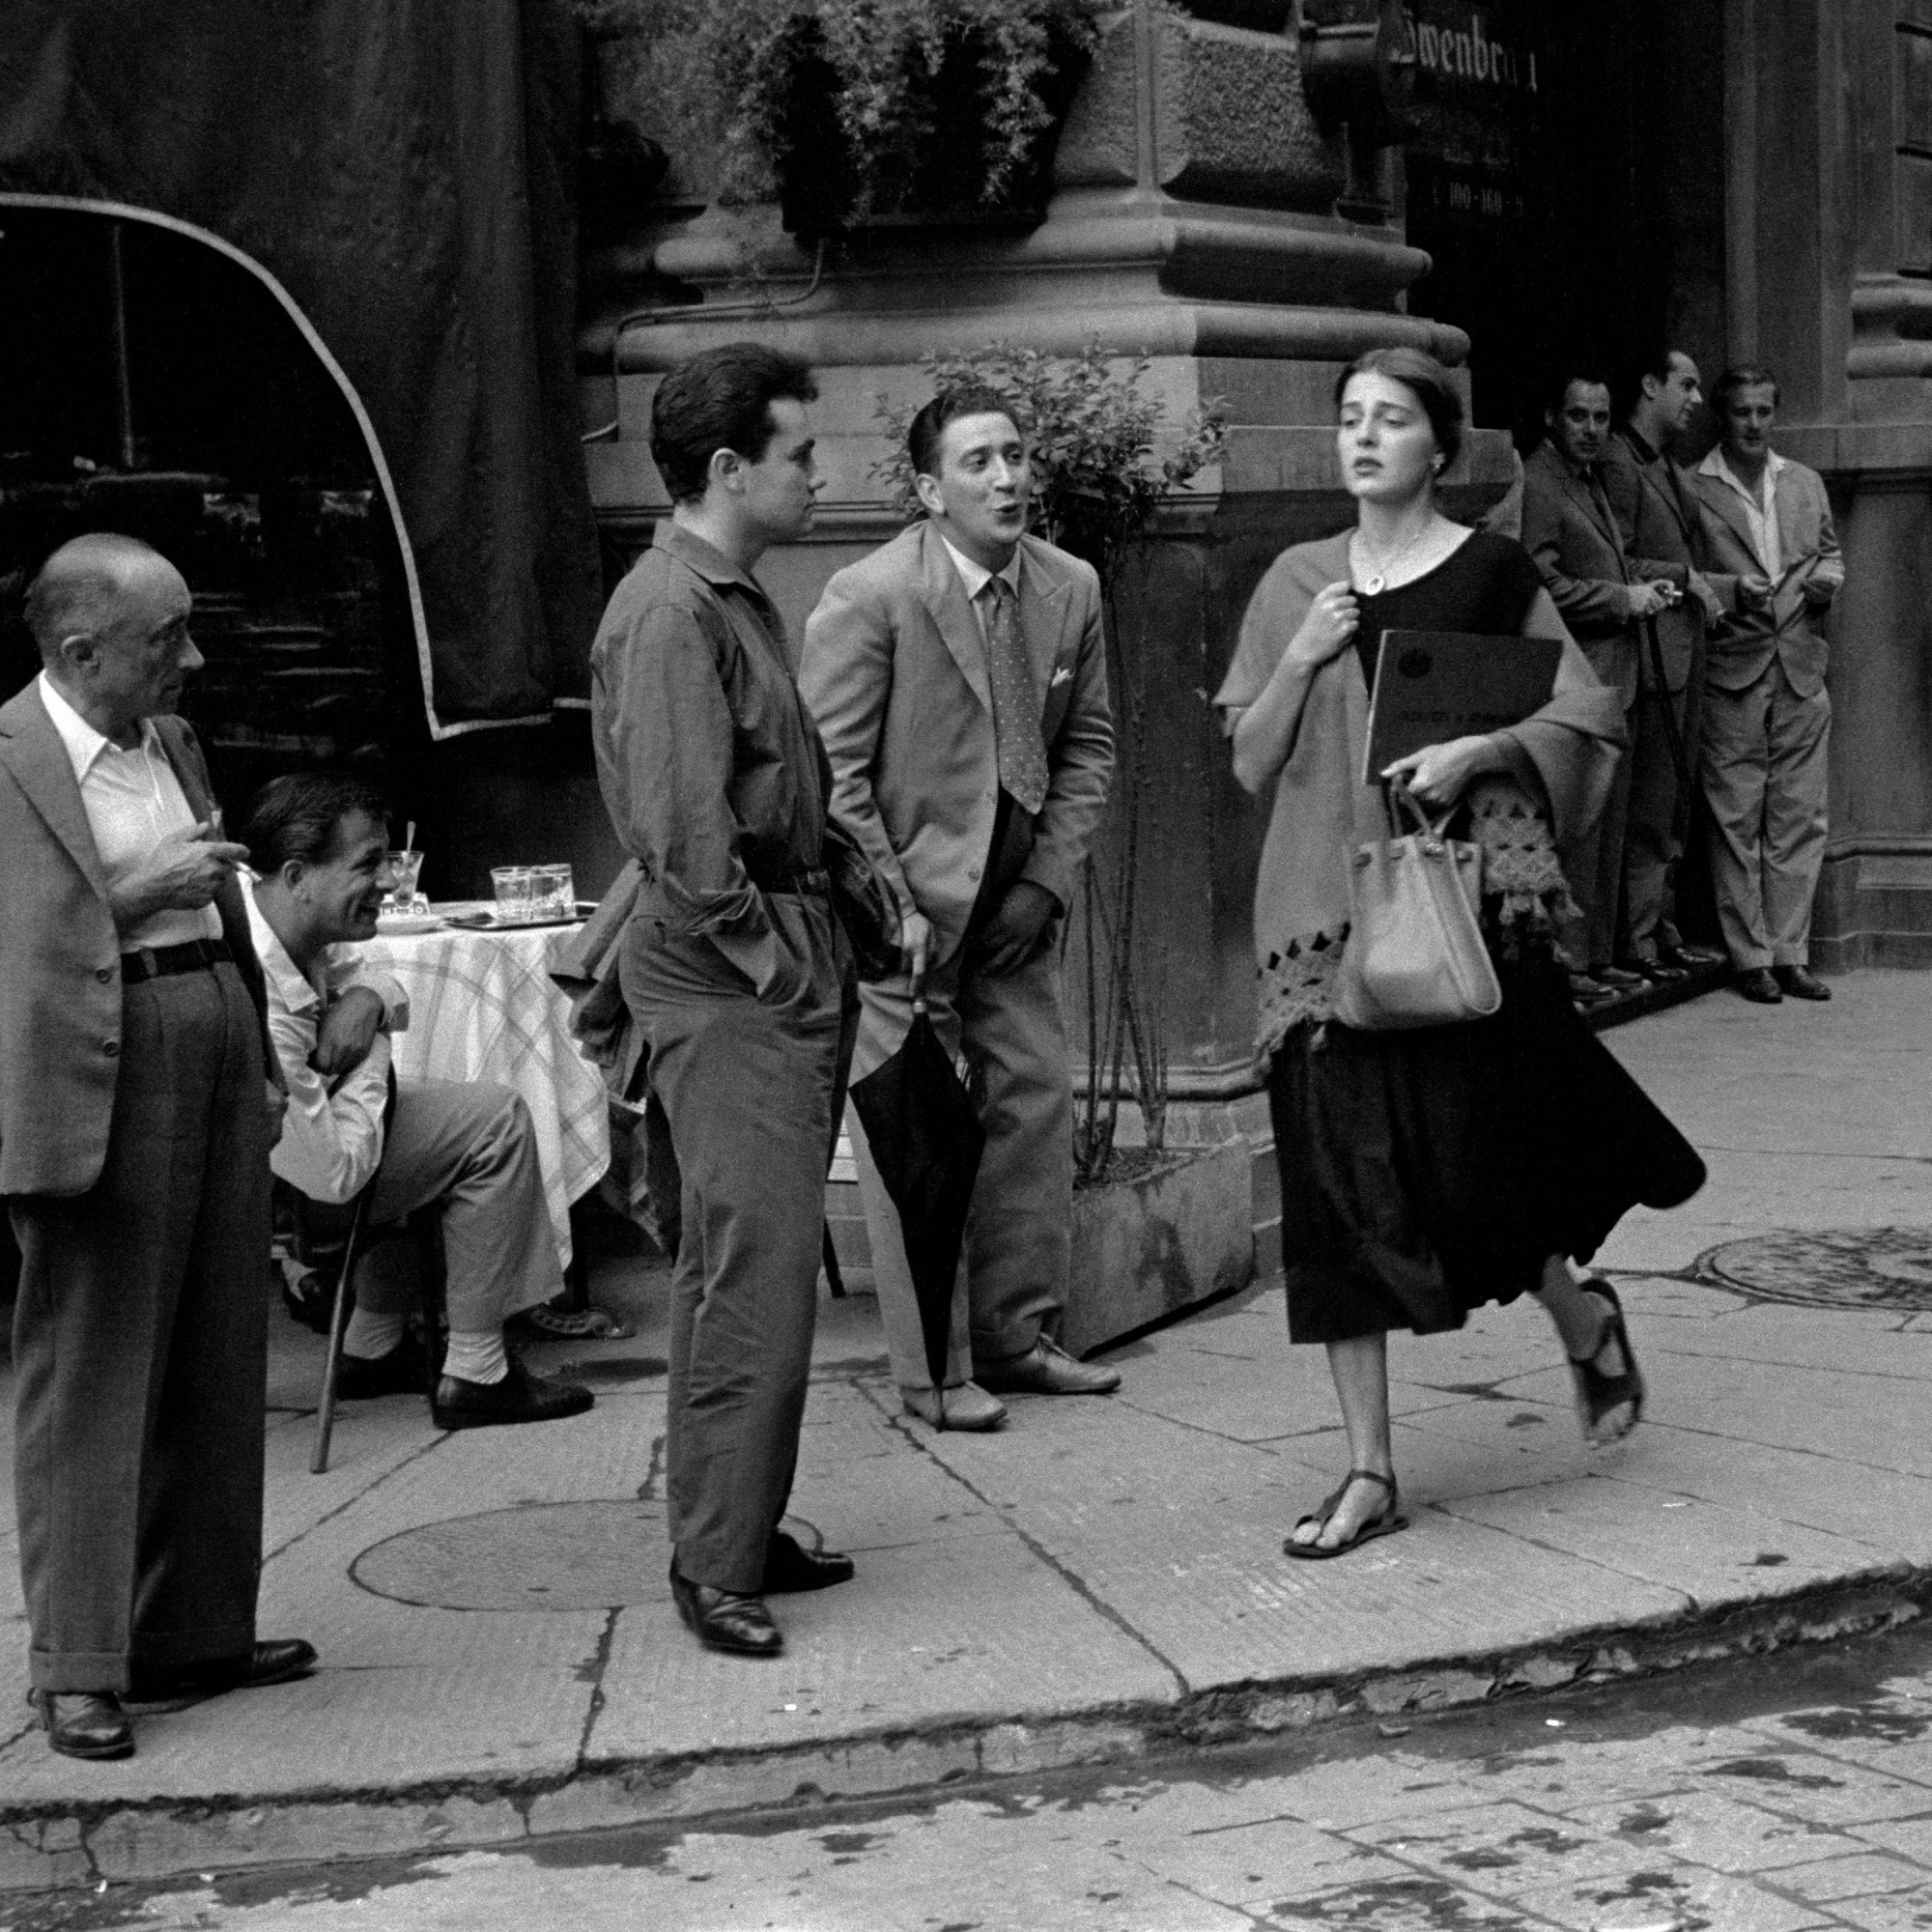 Ruth Orkin. Legend of photography